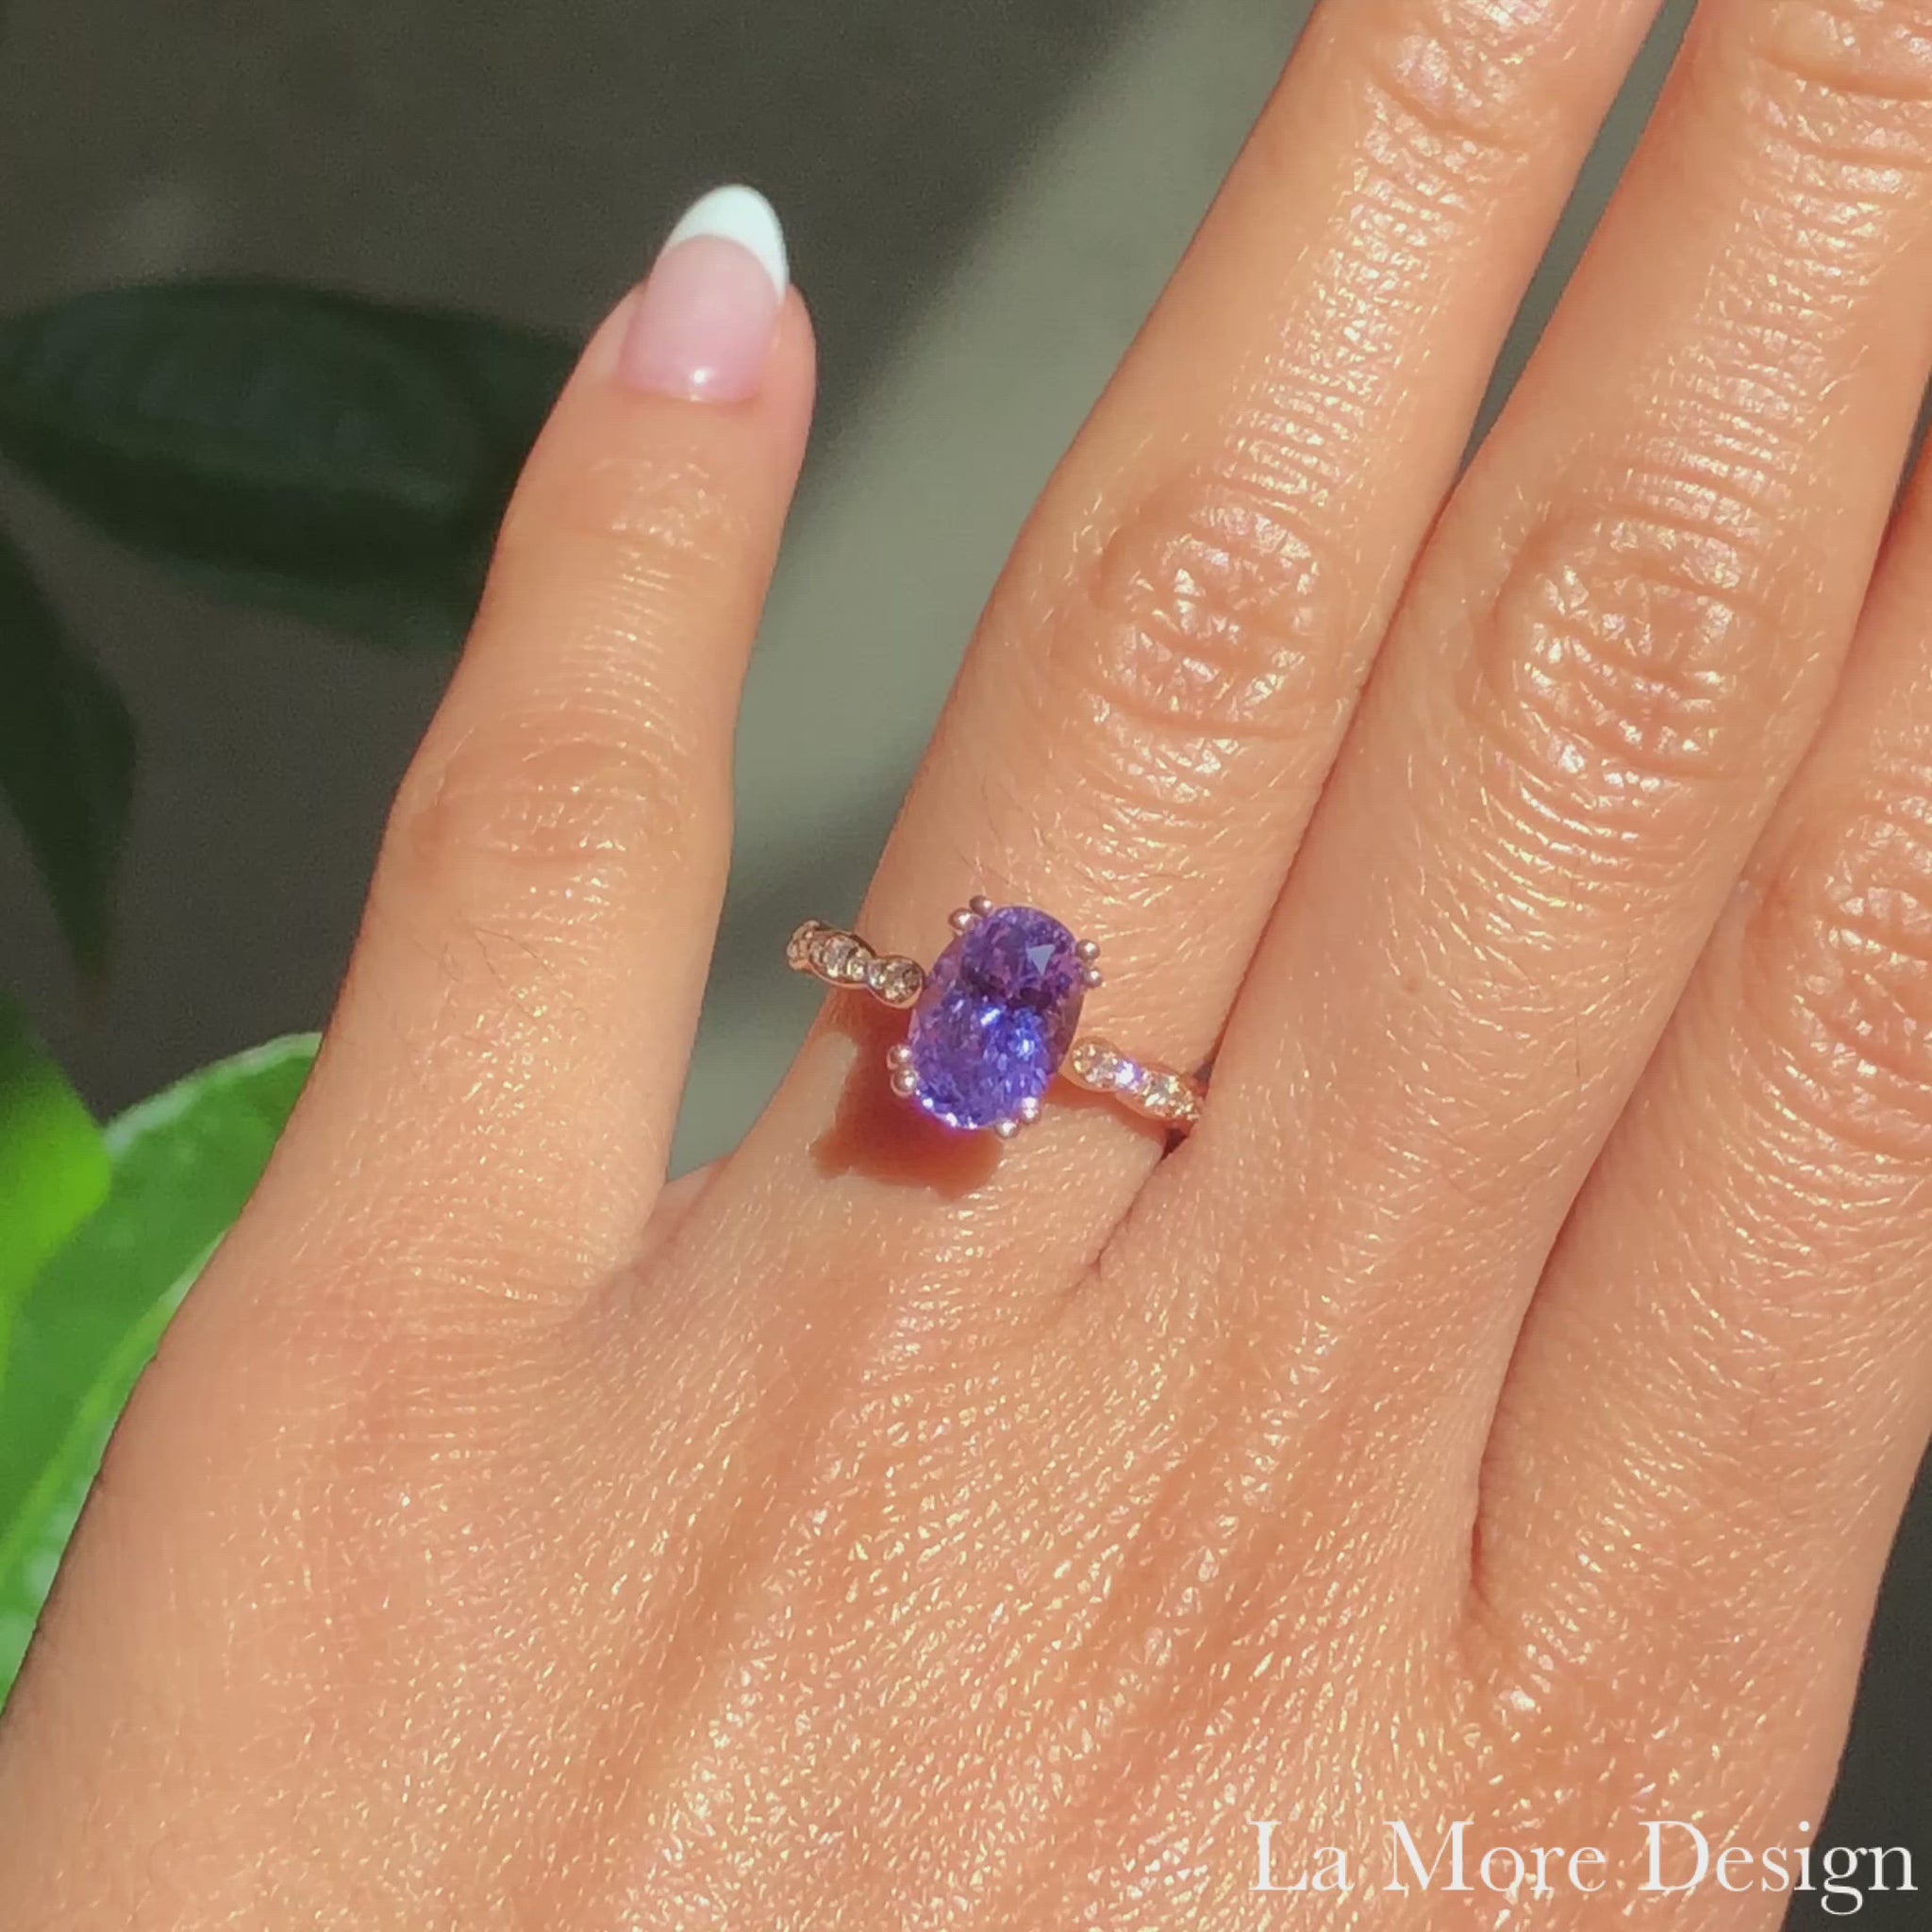 This breaktakingly stunning purple sapphire engagement ring is crafted in 14k rose gold Grace Solitaire ring setting with a large 2.58-carat oval cut natural purple sapphire center and is finished in our signature scalloped diamond band to complete the look ~ total gemstone and diamond weight of the whole ring is 2.78 ct.tw.  This one-of-a-kind sapphire ring is perfect for brides looking for non-traditional engagement rings. All our wedding bands can pair beautifully with this gorgeous solitaire sapphire ri